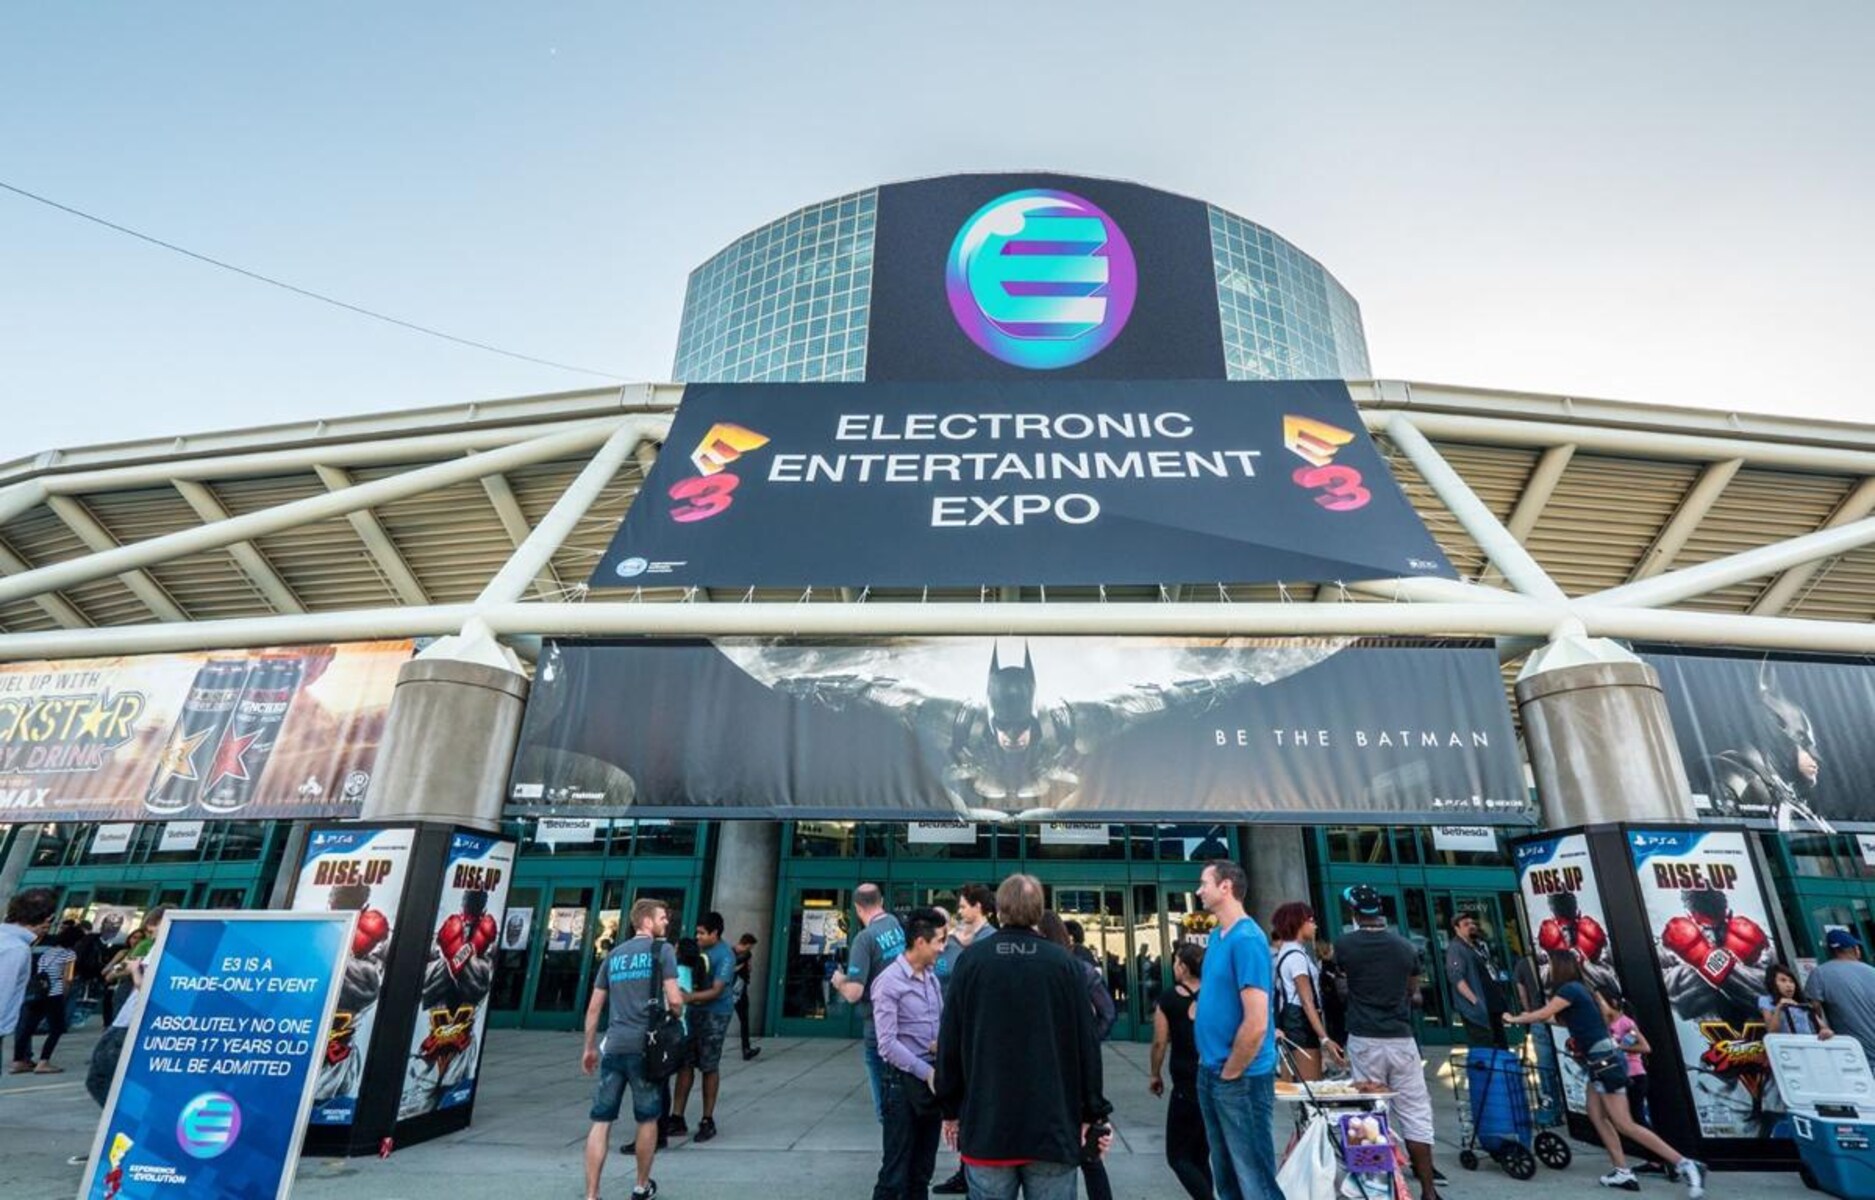 12 Facts About E3 (Electronic Entertainment Expo)